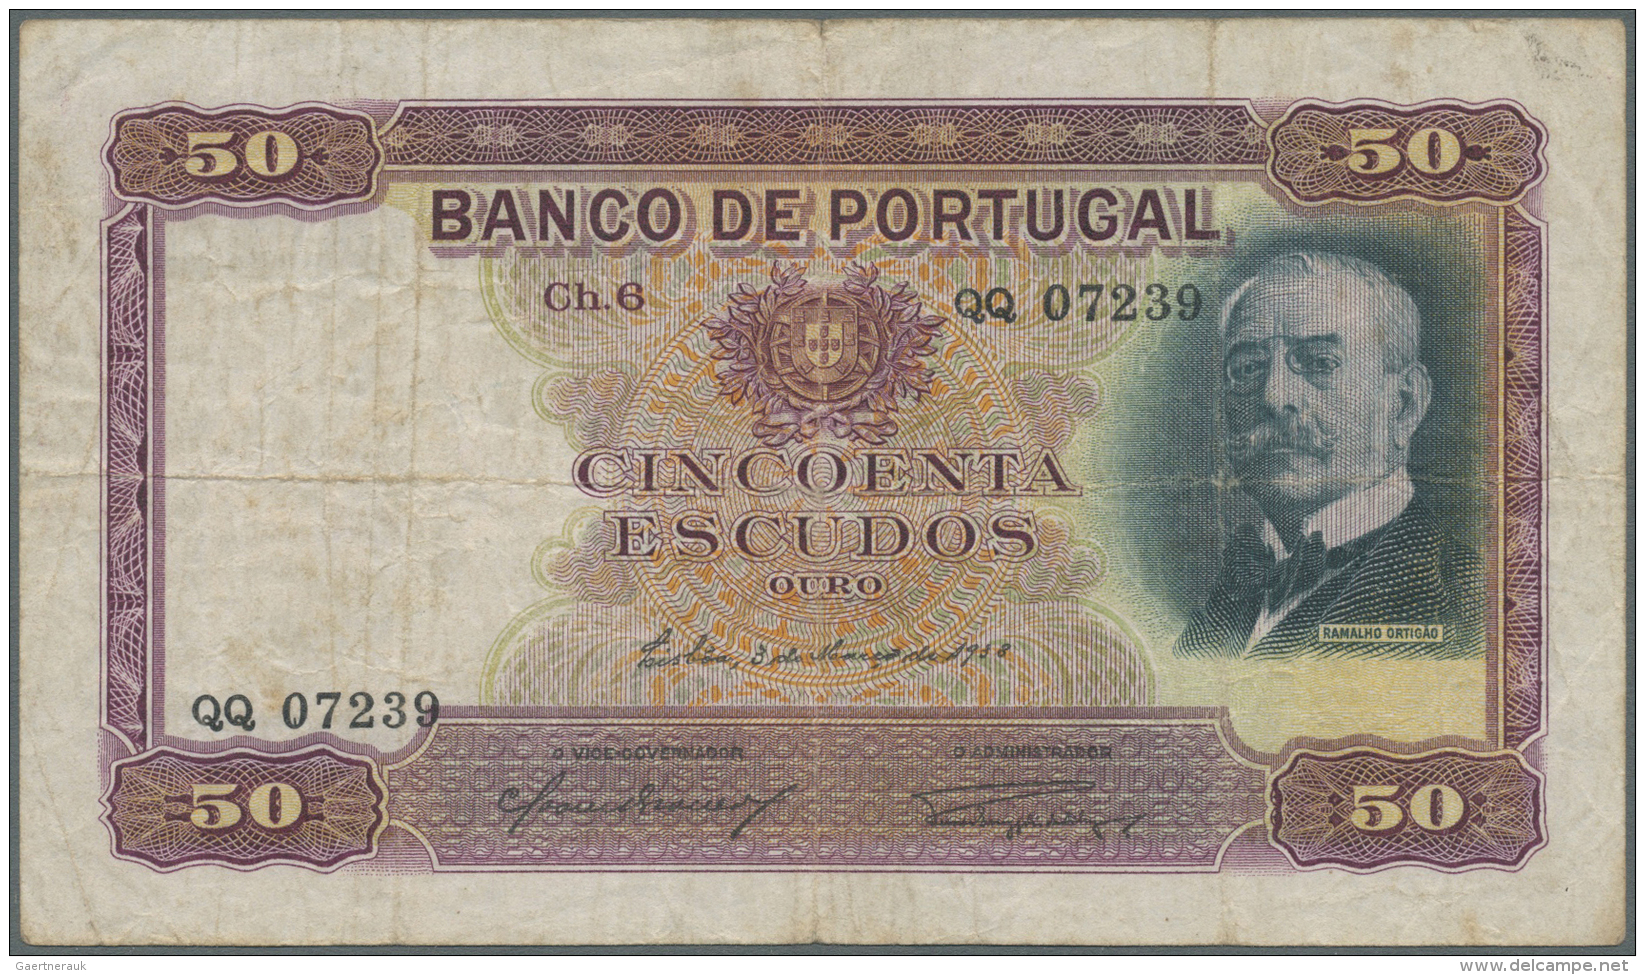 Portugal: 50 Escudos 1938 P. 149, Normal Traces Of Use, Stronger Center Fold, Light Staining In Paper, No Holes Or Tears - Portugal